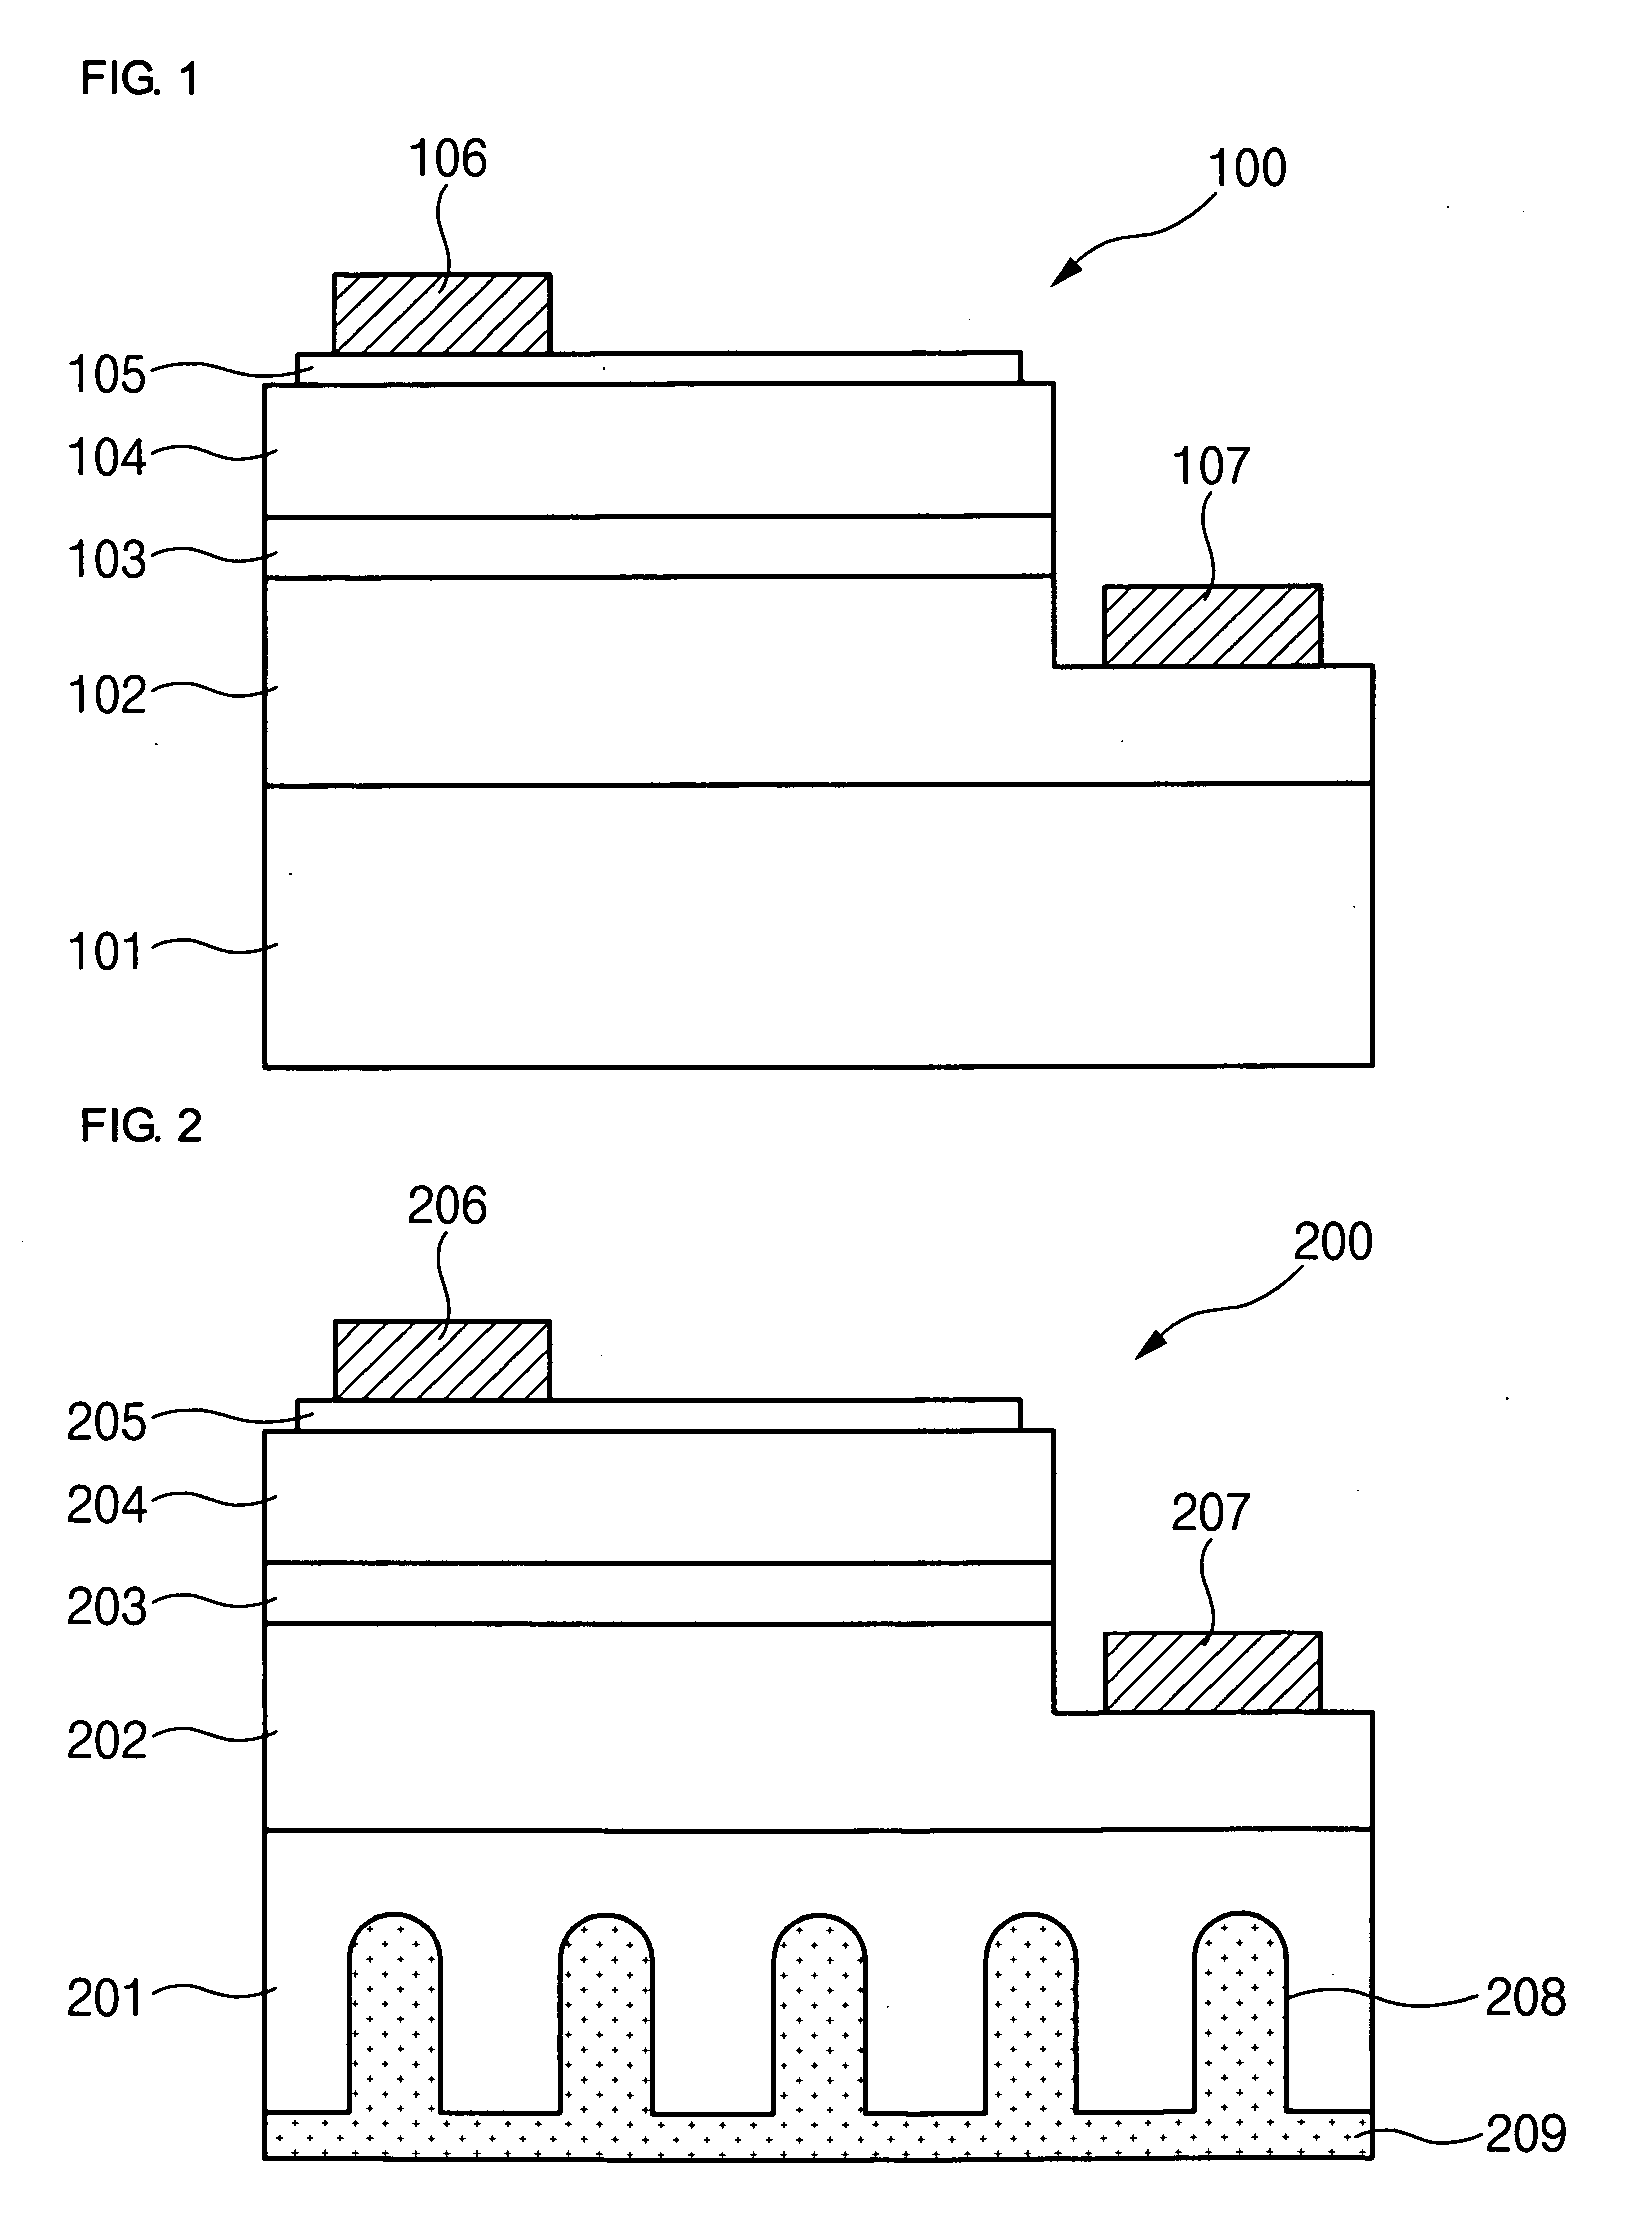 Gallium nitride based semiconductor light emitting diode and method of manufacturing the same